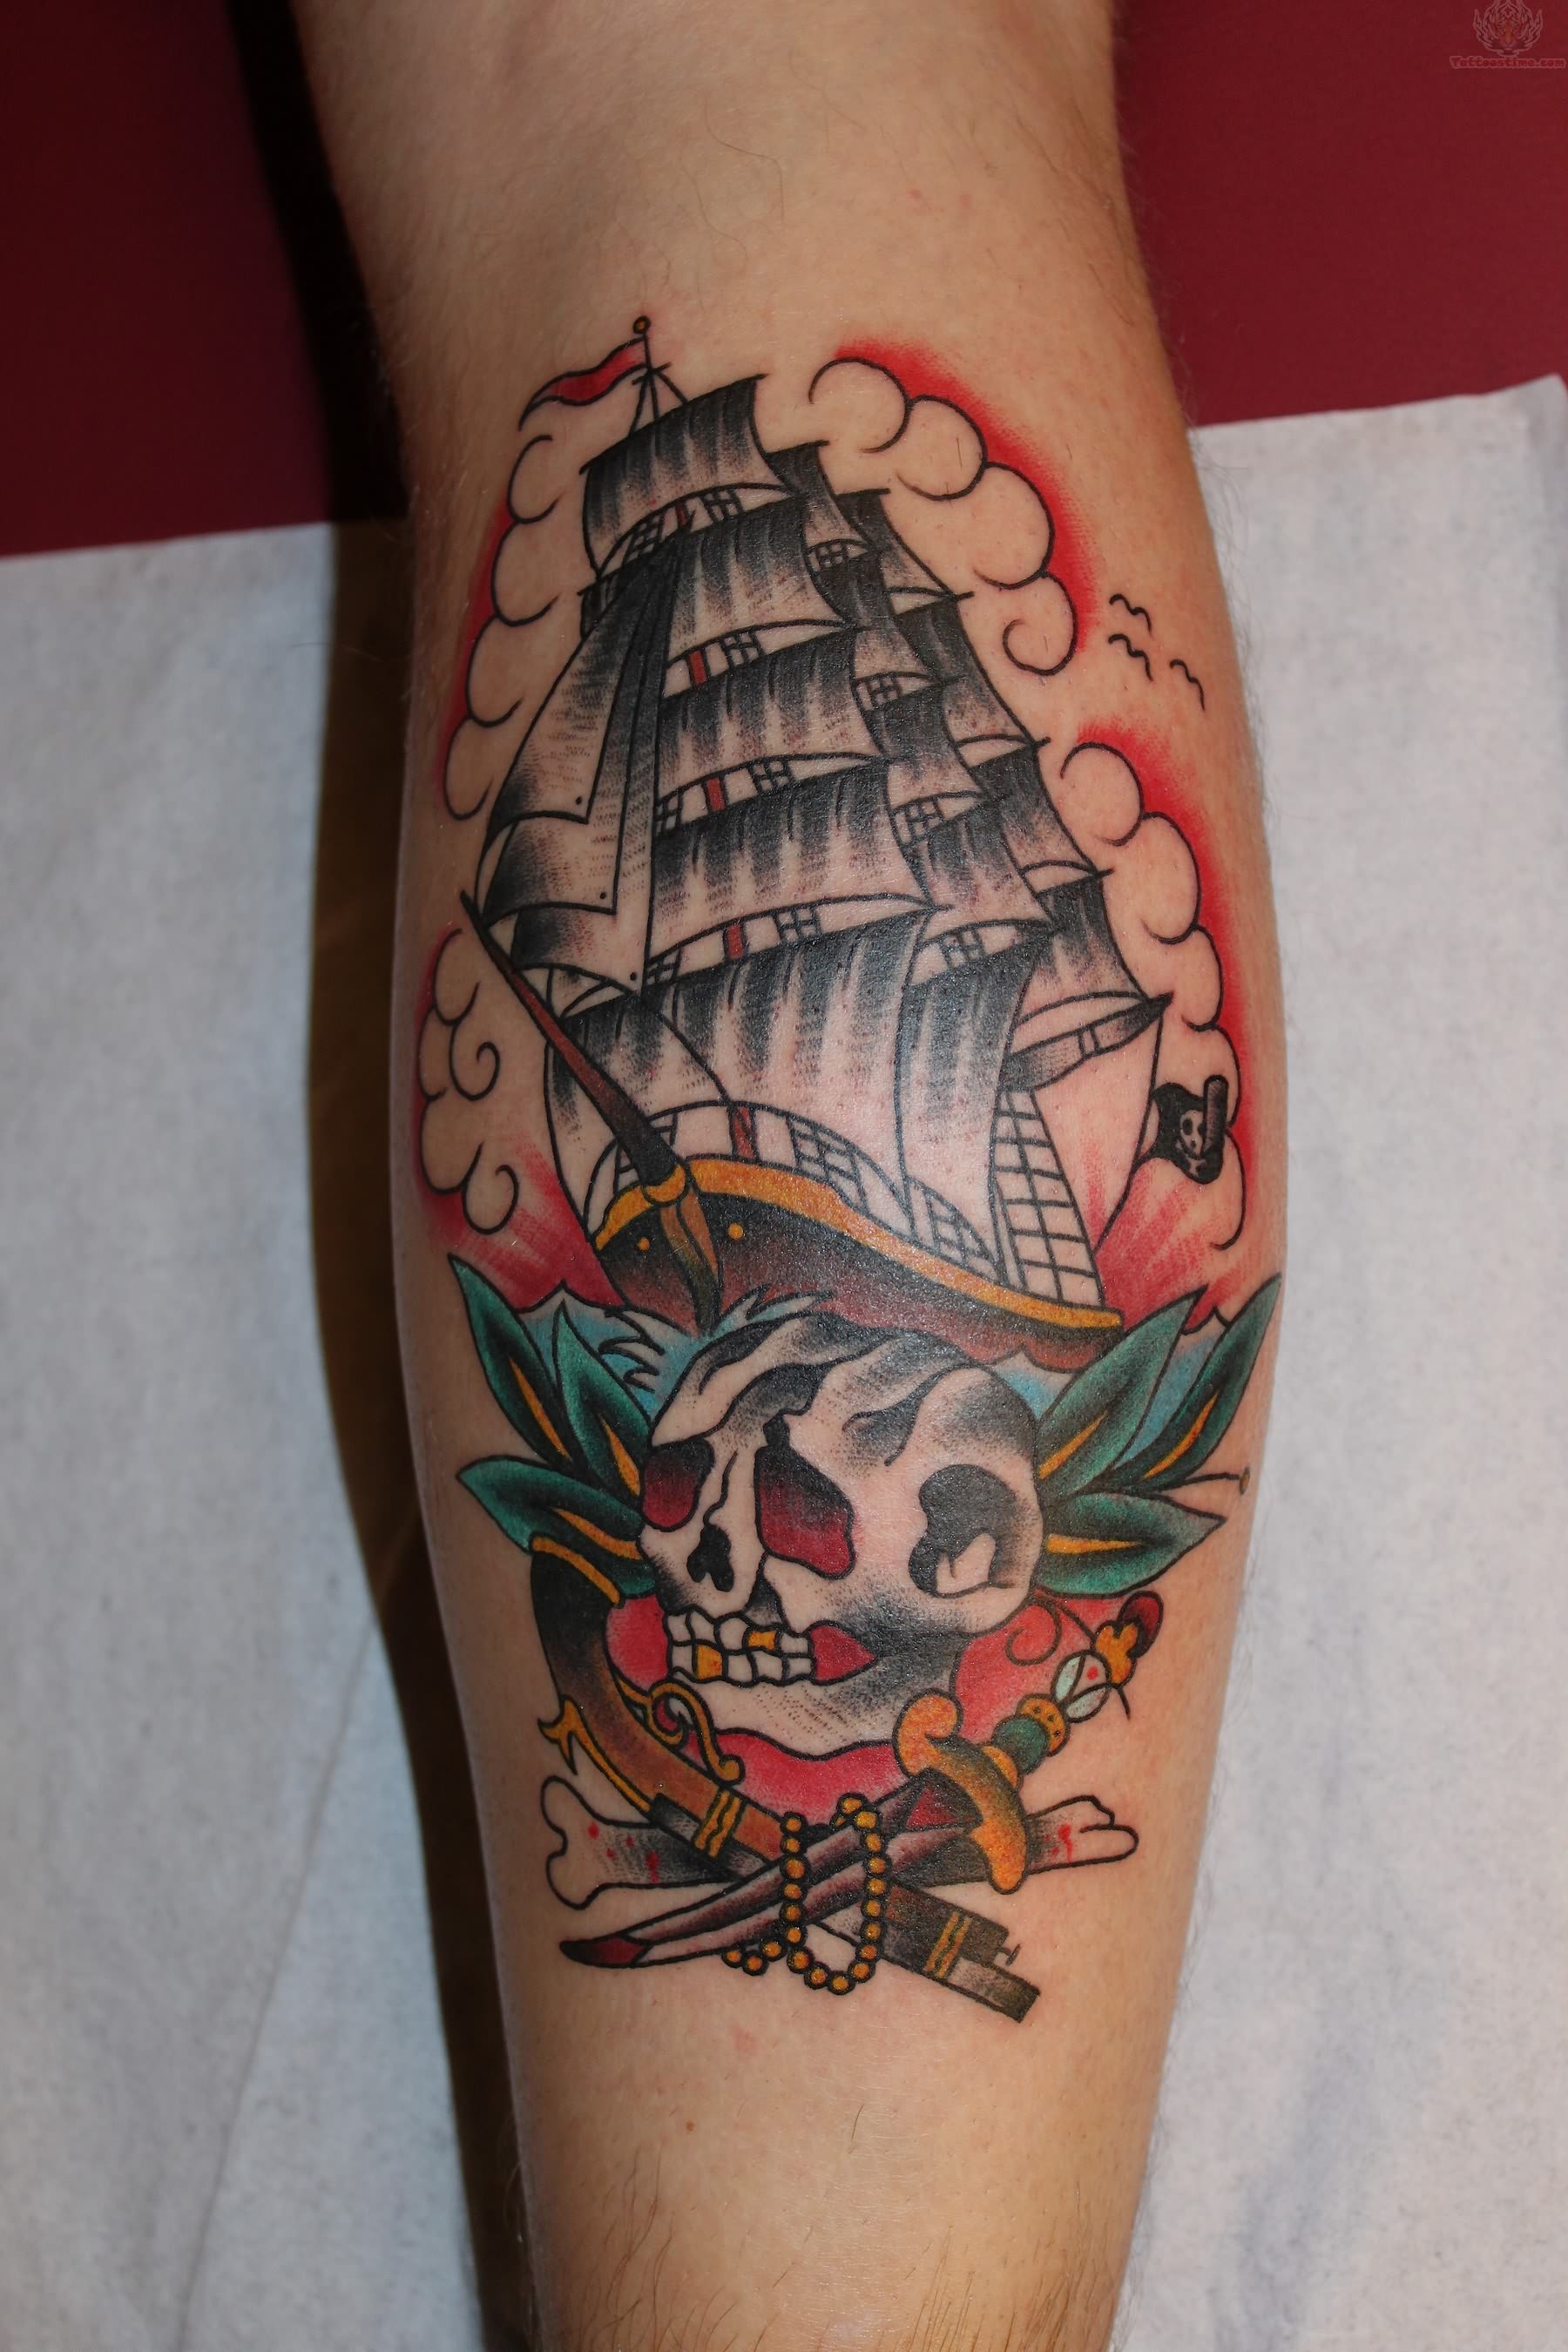 Colorful Traditional Pirate Skull With Ship Tattoo Design For Leg Calf